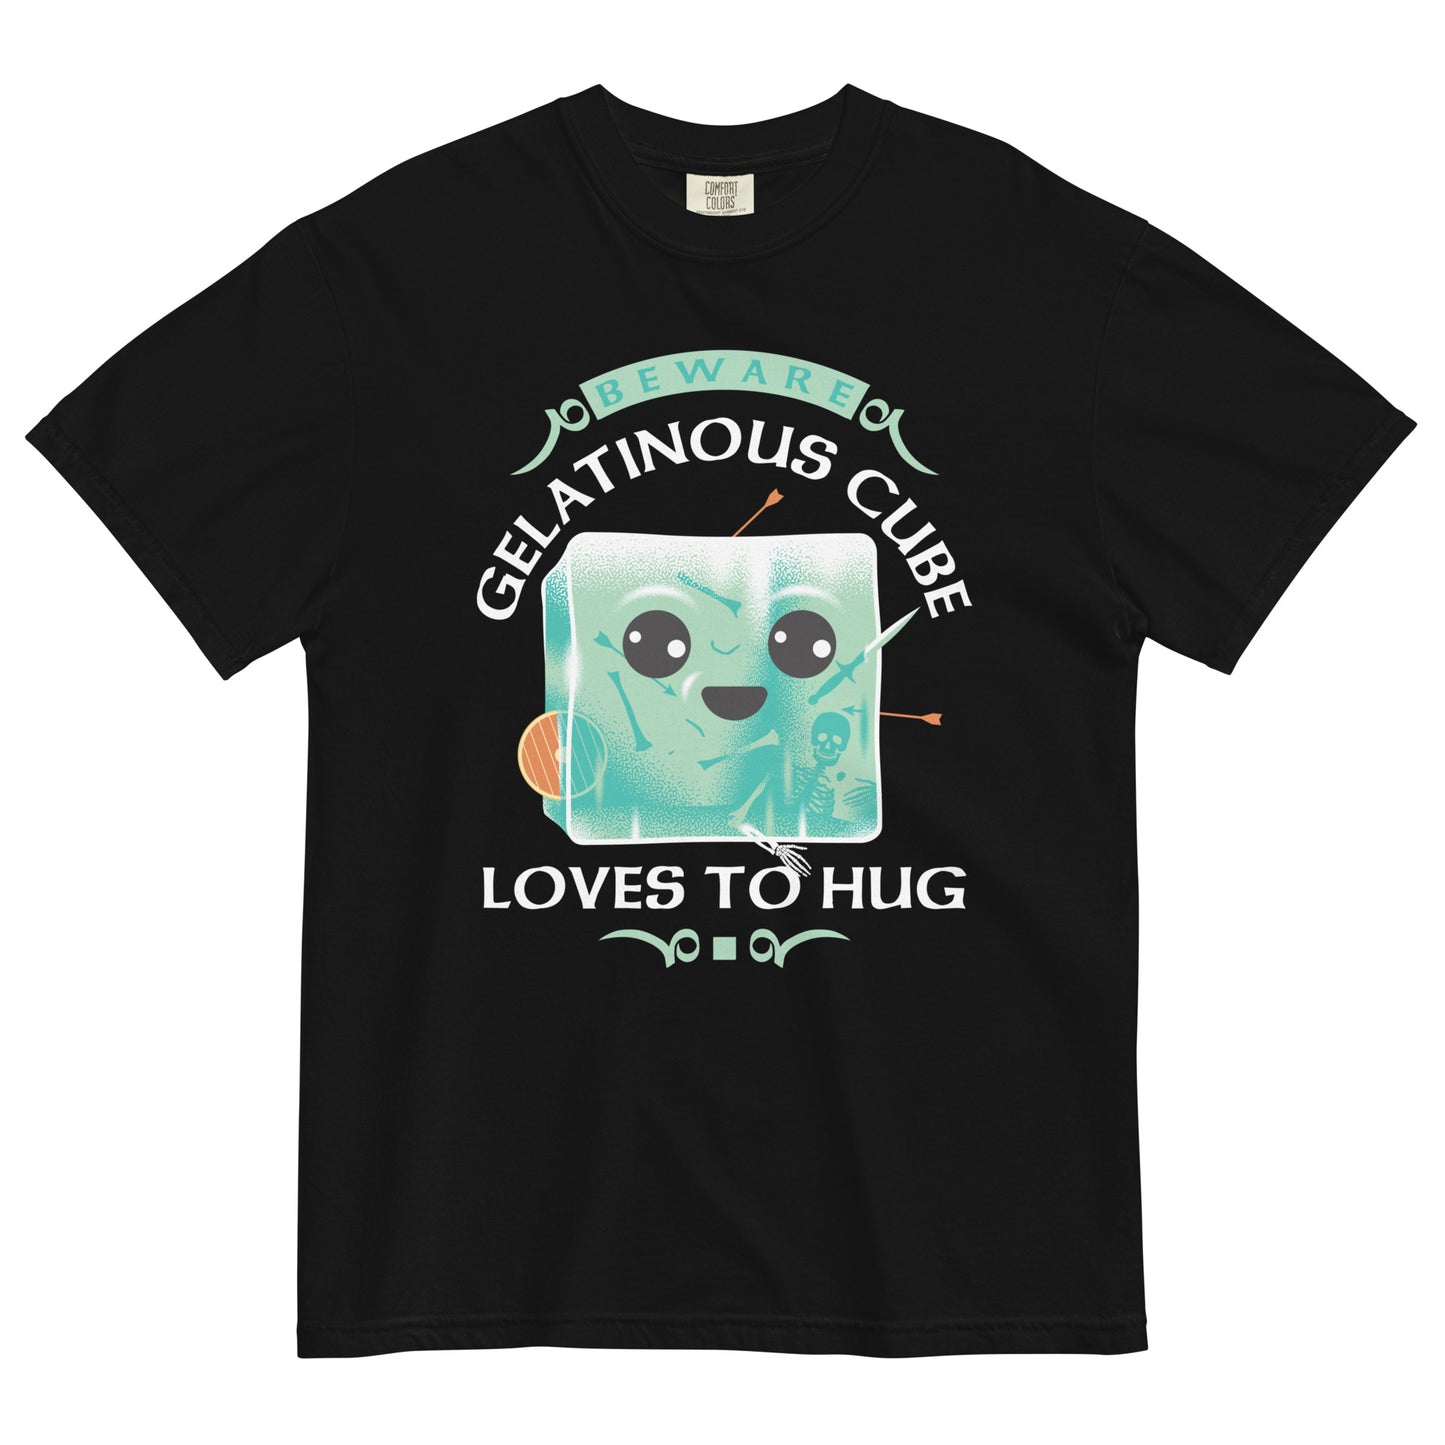 Gelatinous Cube Loves To Hug Men's Relaxed Fit Tee